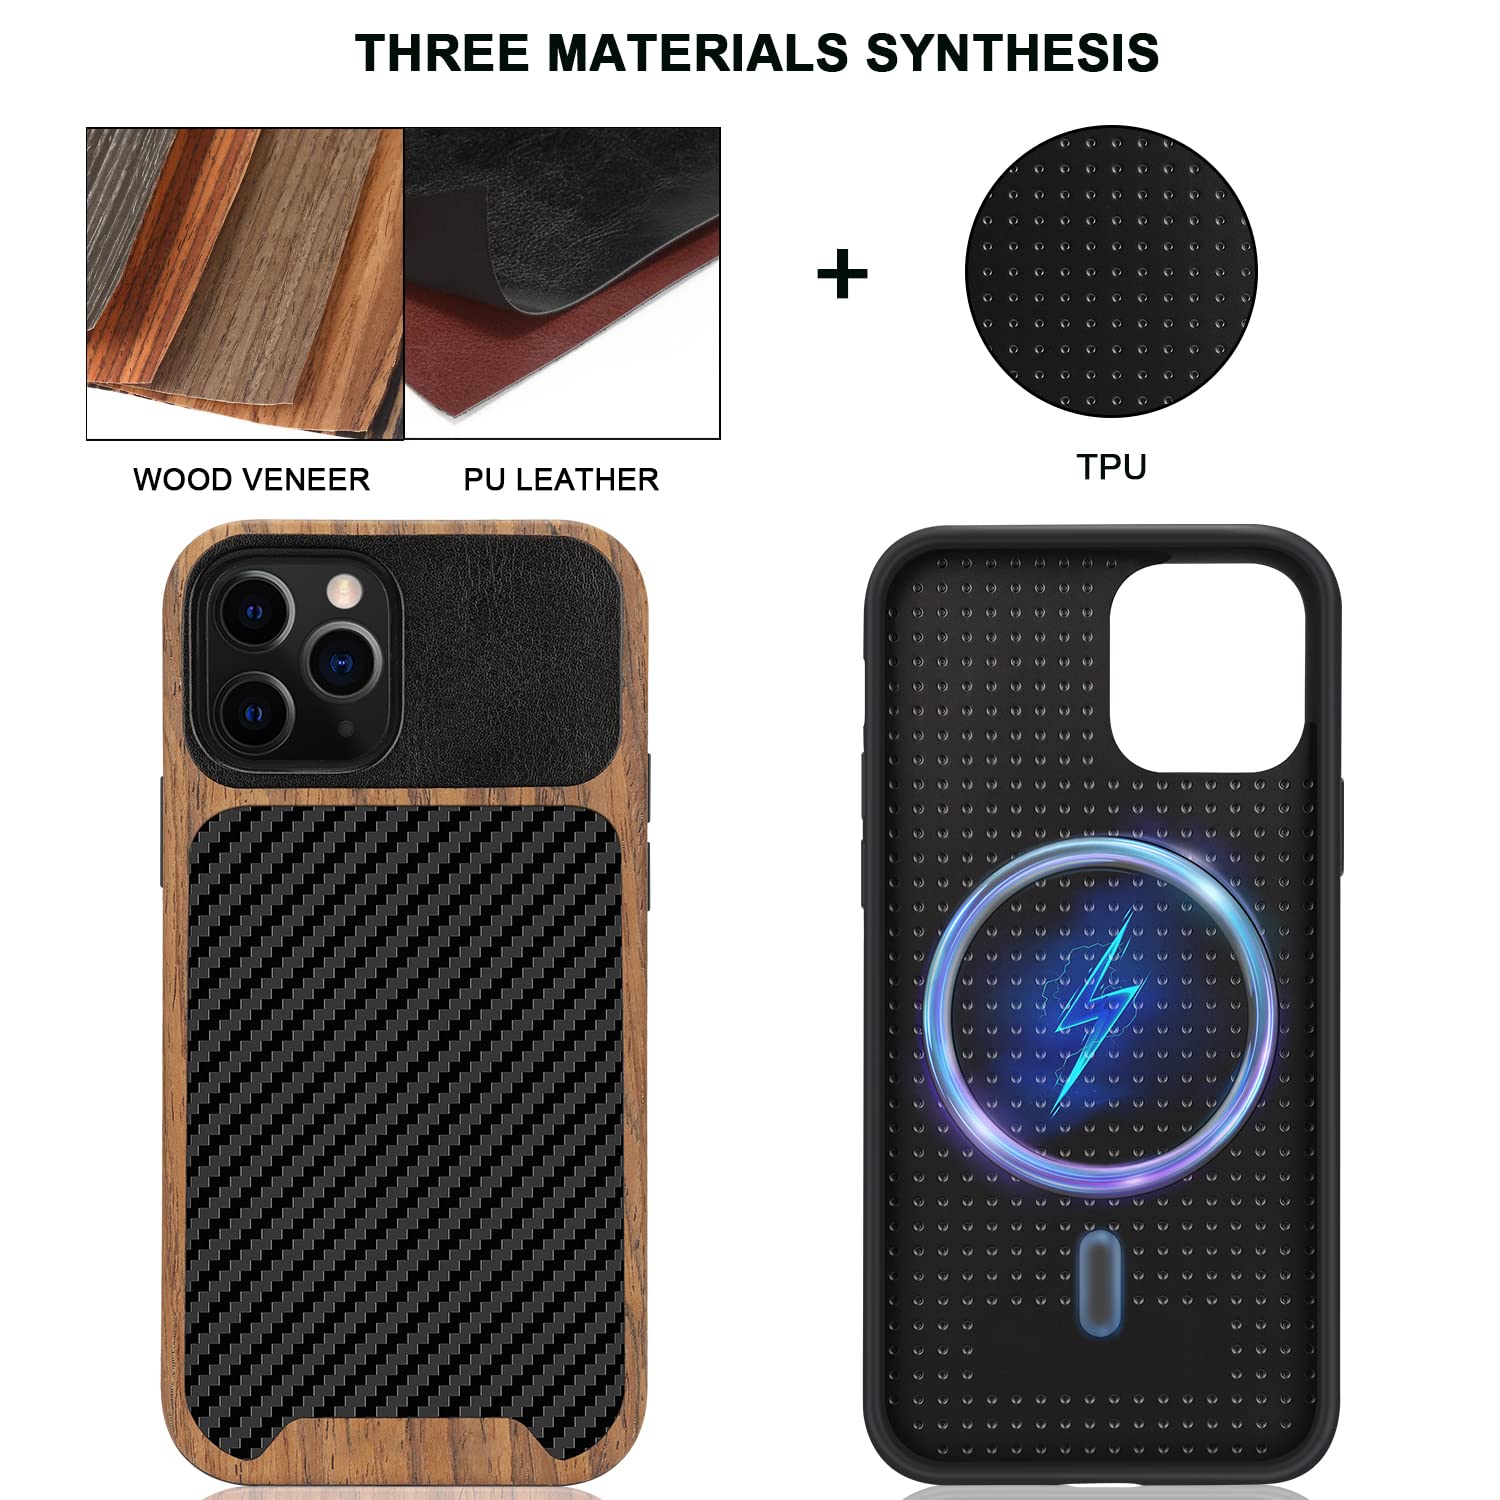 TENDLIN Magnetic Case Compatible with iPhone 12 Pro Case/iPhone 12 Case Wood Grain with Carbon Fiber Texture Design Leather Hybrid Slim Case (Compatible with MagSafe) Black